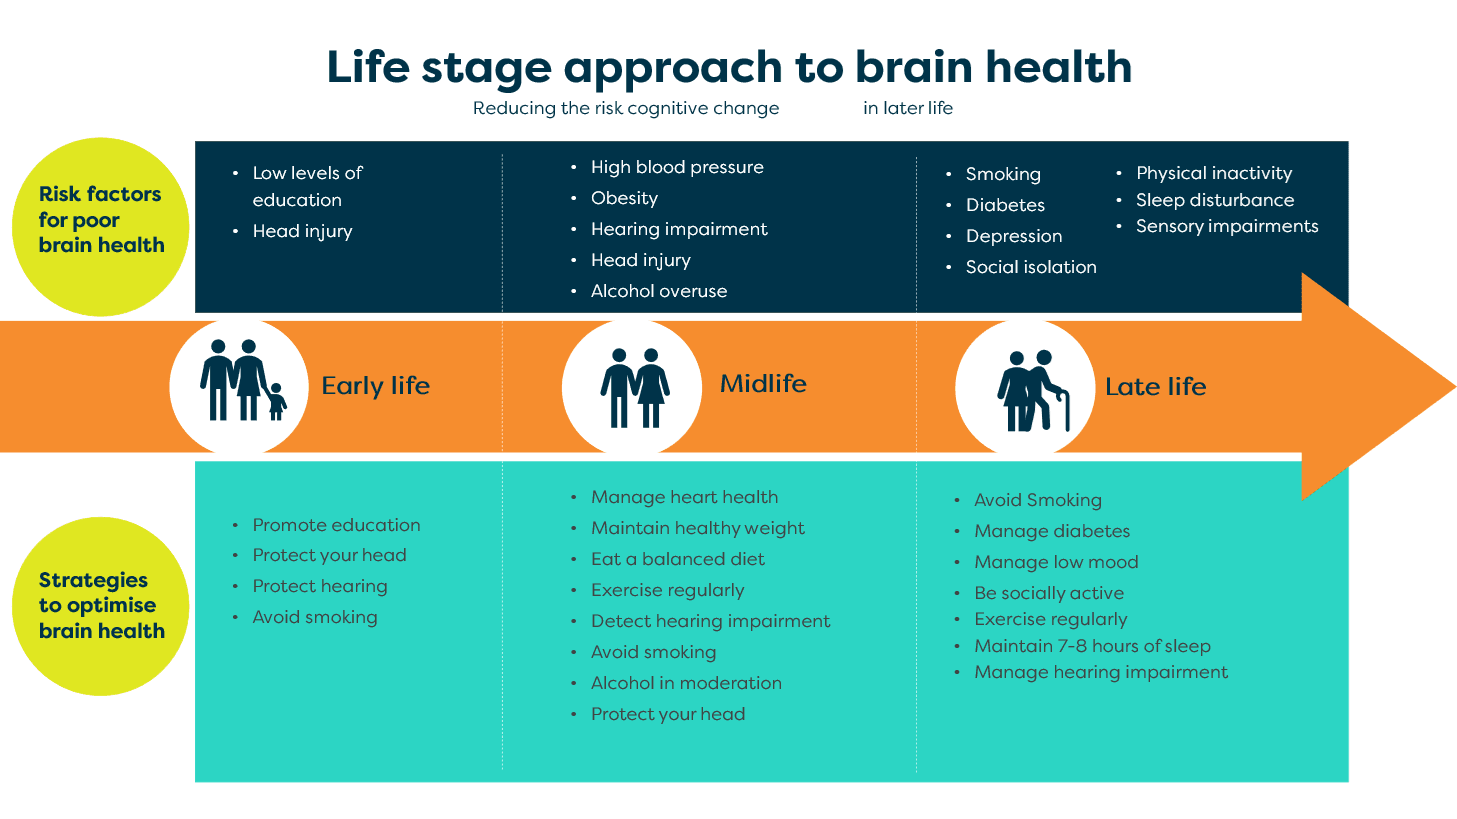 Life stages approach to brain health